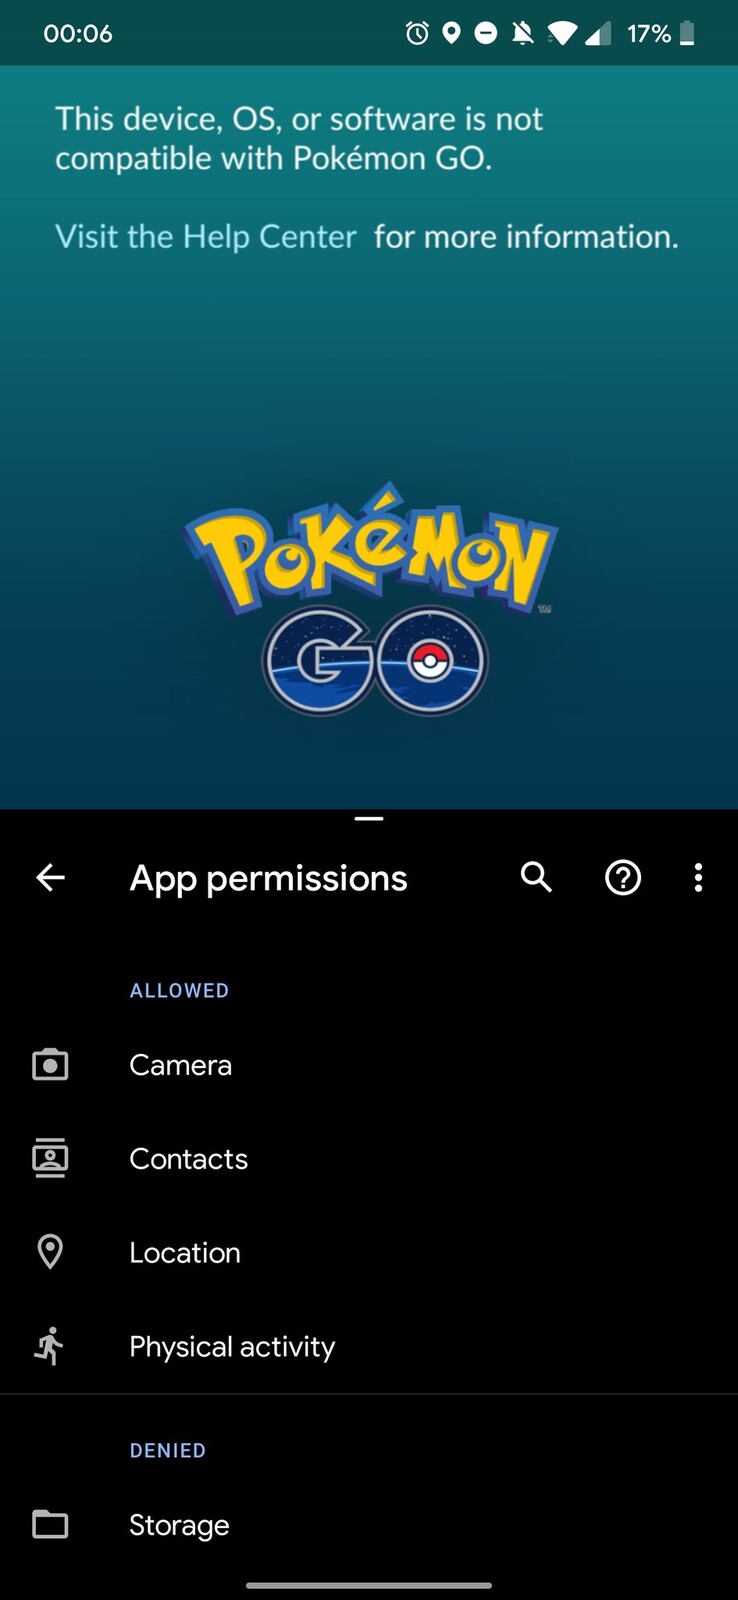 A TWRP user may encounter this message on opening Pokémon GO. (Source: Twitter)